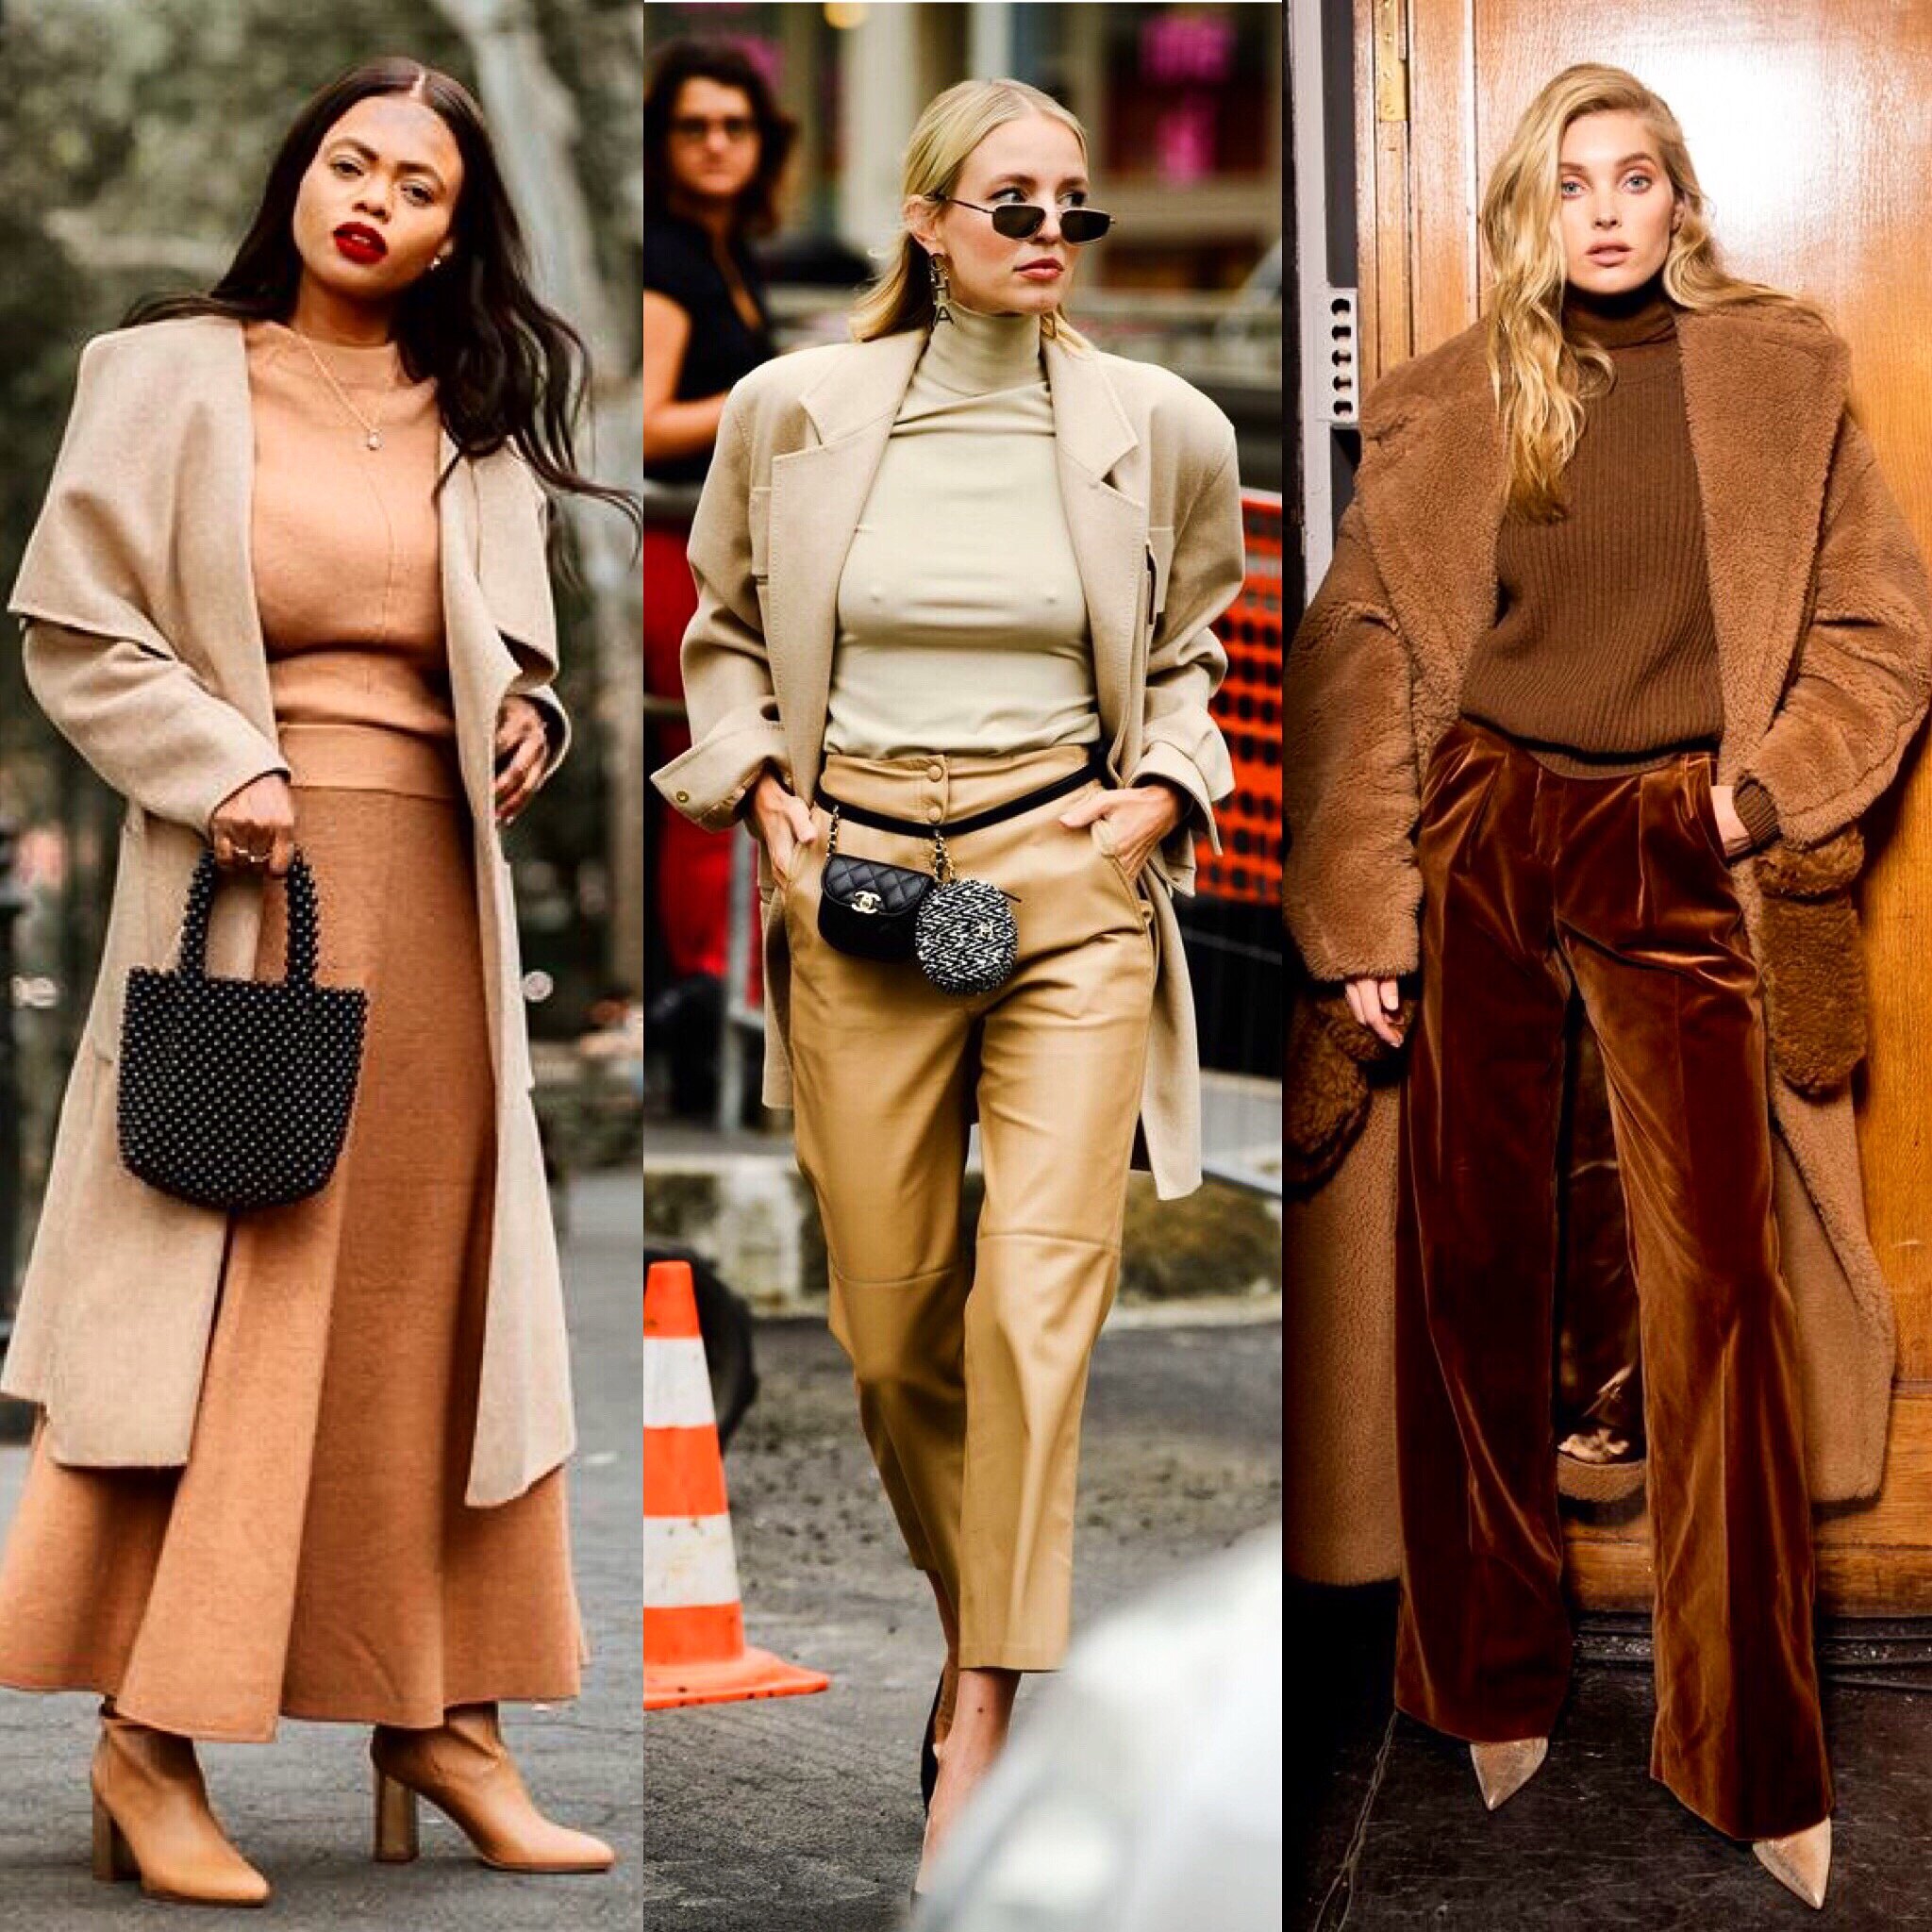   To switch up the matchy matchy aesthetic that’s often tied to neutral looks, go for a tonal ensemb. By mixing different shades within a specific color scheme, you create a look that’s dynamic but cohesive. I love that these looks show that neutral 